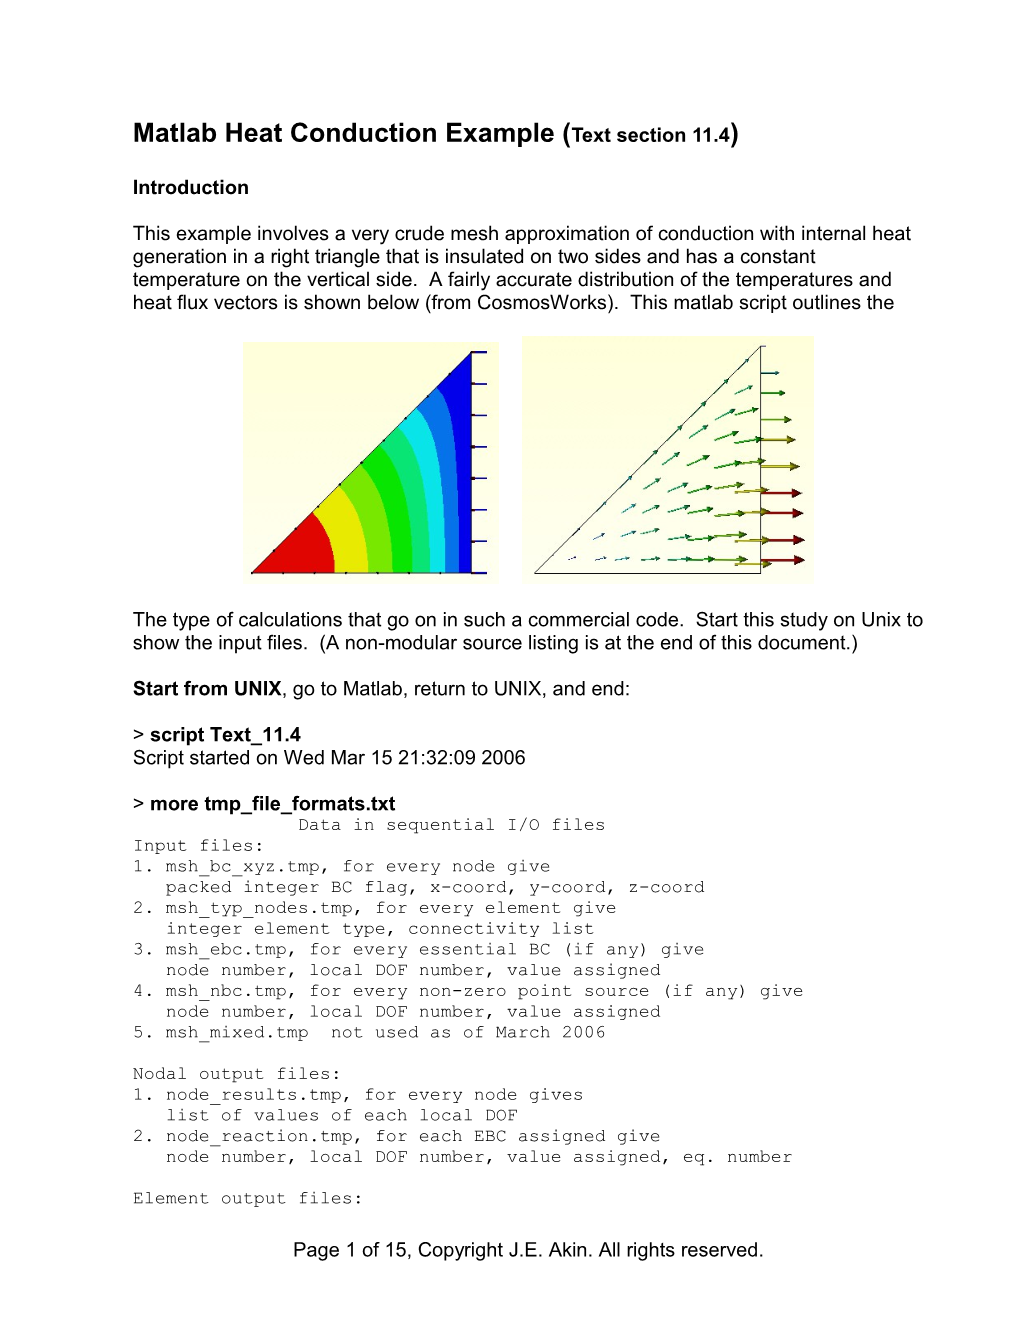 Matlab Heat Conduction Example (Text Section 11